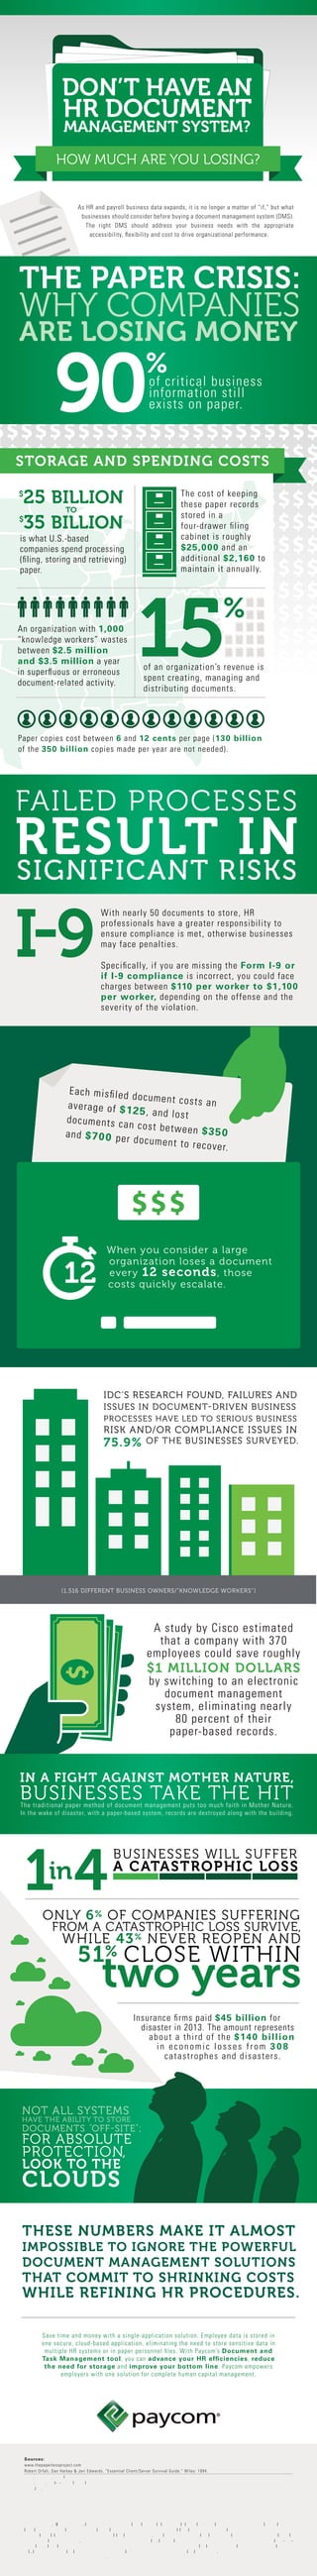 Each misﬁled document costs anaverage of $125, and lostdocuments can cost between $350and $700 per document to recover.
When you consider a large
organization loses a document
every 12 seconds, those
costs quickly escalate.12
STORAGE AND SPENDING COSTS
As HR and payroll business data expands, it is no longer a matter of “if,” but what
businesses should consider before buying a document management system (DMS).
The right DMS should address your business needs with the appropriate
accessibility, ﬂexibility and cost to drive organizational performance.
DON’T HAVE AN
HR DOCUMENT
MANAGEMENT SYSTEM?
HOW MUCH ARE YOU LOSING?
90%of critical business
information still
exists on paper.
THE PAPER CRISIS:
WHY COMPANIES
ARE LOSING MONEY
$
25 BILLION
TO
$
35 BILLION
15%
is what U.S.-based
companies spend processing
(ﬁling, storing and retrieving)
paper.
Speciﬁcally, if you are missing the Form I-9 or
if I-9 compliance is incorrect, you could face
charges between $110 per worker to $1,100
per worker, depending on the offense and the
severity of the violation.
With nearly 50 documents to store, HR
professionals have a greater responsibility to
ensure compliance is met, otherwise businesses
may face penalties.
An organization with 1,000
“knowledge workers” wastes
between $2.5 million
and $3.5 million a year
in superﬂuous or erroneous
document-related activity.
Paper copies cost between 6 and 12 cents per page (130 billion
of the 350 billion copies made per year are not needed).
The cost of keeping
these paper records
stored in a
four-drawer ﬁling
cabinet is roughly
$25,000 and an
additional $2,160 to
maintain it annually.
of an organization’s revenue is
spent creating, managing and
distributing documents.
FAILED PROCESSES
RESULT INSIGNIFICANT R SKS
Save time and money with a single-application solution. Employee data is stored in
one secure, cloud-based application, eliminating the need to store sensitive data in
multiple HR systems or in paper personnel ﬁles. With Paycom’s Document and
Task Management tool, you can advance your HR efﬁciencies, reduce
the need for storage and improve your bottom line. Paycom empowers
employers with one solution for complete human capital management.
© 2014, Paycom. All rights reserved. INTELLECTUAL PROPERTY DISCLAIMER: THIS INFOGRAPHIC IS FOR INFORMATIONAL PURPOSES ONLY AND IS PROVIDED “AS
IS” WITH NO WARRANTIES WHATSOEVER INCLUDING ANY WARRANTY OF MERCHANTABILITY, FITNESS FOR ANY PARTICULAR PURPOSE, OR ANY WARRANTY
OTHERWISE ARISING OUT OF ANY PROPOSAL, SPECIFICATION, OR SAMPLE. NO LICENSE, EXPRESS OR IMPLIED, TO ANY INTELLECTUAL PROPERTY RIGHTS IS
GRANTED OR INTENDED HEREBY. This infographic is protected by copyright law. Individuals may reproduce and distribute this infographic for individual, non-com-
mercial use. DISCLAIMER: The content of this infographic is intended to keep interested parties informed of legal and industry developments for educational purposes
only. It is not intended as legal opinion or tax advice and should not be regarded as a substitute for legal or tax advice. Product or company names mentioned herein
may be the trademarks of their respective owners.
Sources:
www.thepaperlessproject.com
Robert Orfali, Dan Harkey & Jeri Edwards. “Essential Client/Server Survival Guide.” Wiley: 1994.
www.usatoday.com “Insurance ﬁrms pay out $45B for disasters in 2013” March 2014.
www.uscis.gov/I-9-central/penalties
www.IDC.com
The University of Texas, research study
IN A FIGHT AGAINST MOTHER NATURE,
BUSINESSES TAKE THE HIT
I-9
IDC’S RESEARCH FOUND, FAILURES AND
ISSUES IN DOCUMENT-DRIVEN BUSINESS
PROCESSES HAVE LED TO SERIOUS BUSINESS
RISK AND/OR COMPLIANCE ISSUES IN
75.9% OF THE BUSINESSES SURVEYED.
The traditional paper method of document management puts too much faith in Mother Nature.
In the wake of disaster, with a paper-based system, records are destroyed along with the building.
Insurance ﬁrms paid $45 billion for
disaster in 2013. The amount represents
about a third of the $140 billion
in economic losses from 308
catastrophes and disasters.
BUSINESSES WILL SUFFER
A CATASTROPHIC LOSS
1in4
ONLY 6% OF COMPANIES SUFFERING
FROM A CATASTROPHIC LOSS SURVIVE,
WHILE 43% NEVER REOPEN AND
51% CLOSE WITHIN
two years
FOR ABSOLUTE
PROTECTION,
LOOK TO THE
CLOUDS
DOCUMENTS ”OFF-SITE”;
HAVE THE ABILITY TO STORE
NOT ALL SYSTEMS
A study by Cisco estimated
that a company with 370
employees could save roughly
$1 MILLION DOLLARS
by switching to an electronic
document management
system, eliminating nearly
80 percent of their
paper-based records.
(1,516 DIFFERENT BUSINESS OWNERS/”KNOWLEDGE WORKERS”)
THESE NUMBERS MAKE IT ALMOST
IMPOSSIBLE TO IGNORE THE POWERFUL
DOCUMENT MANAGEMENT SOLUTIONS
THAT COMMIT TO SHRINKING COSTS
WHILE REFINING HR PROCEDURES.
 